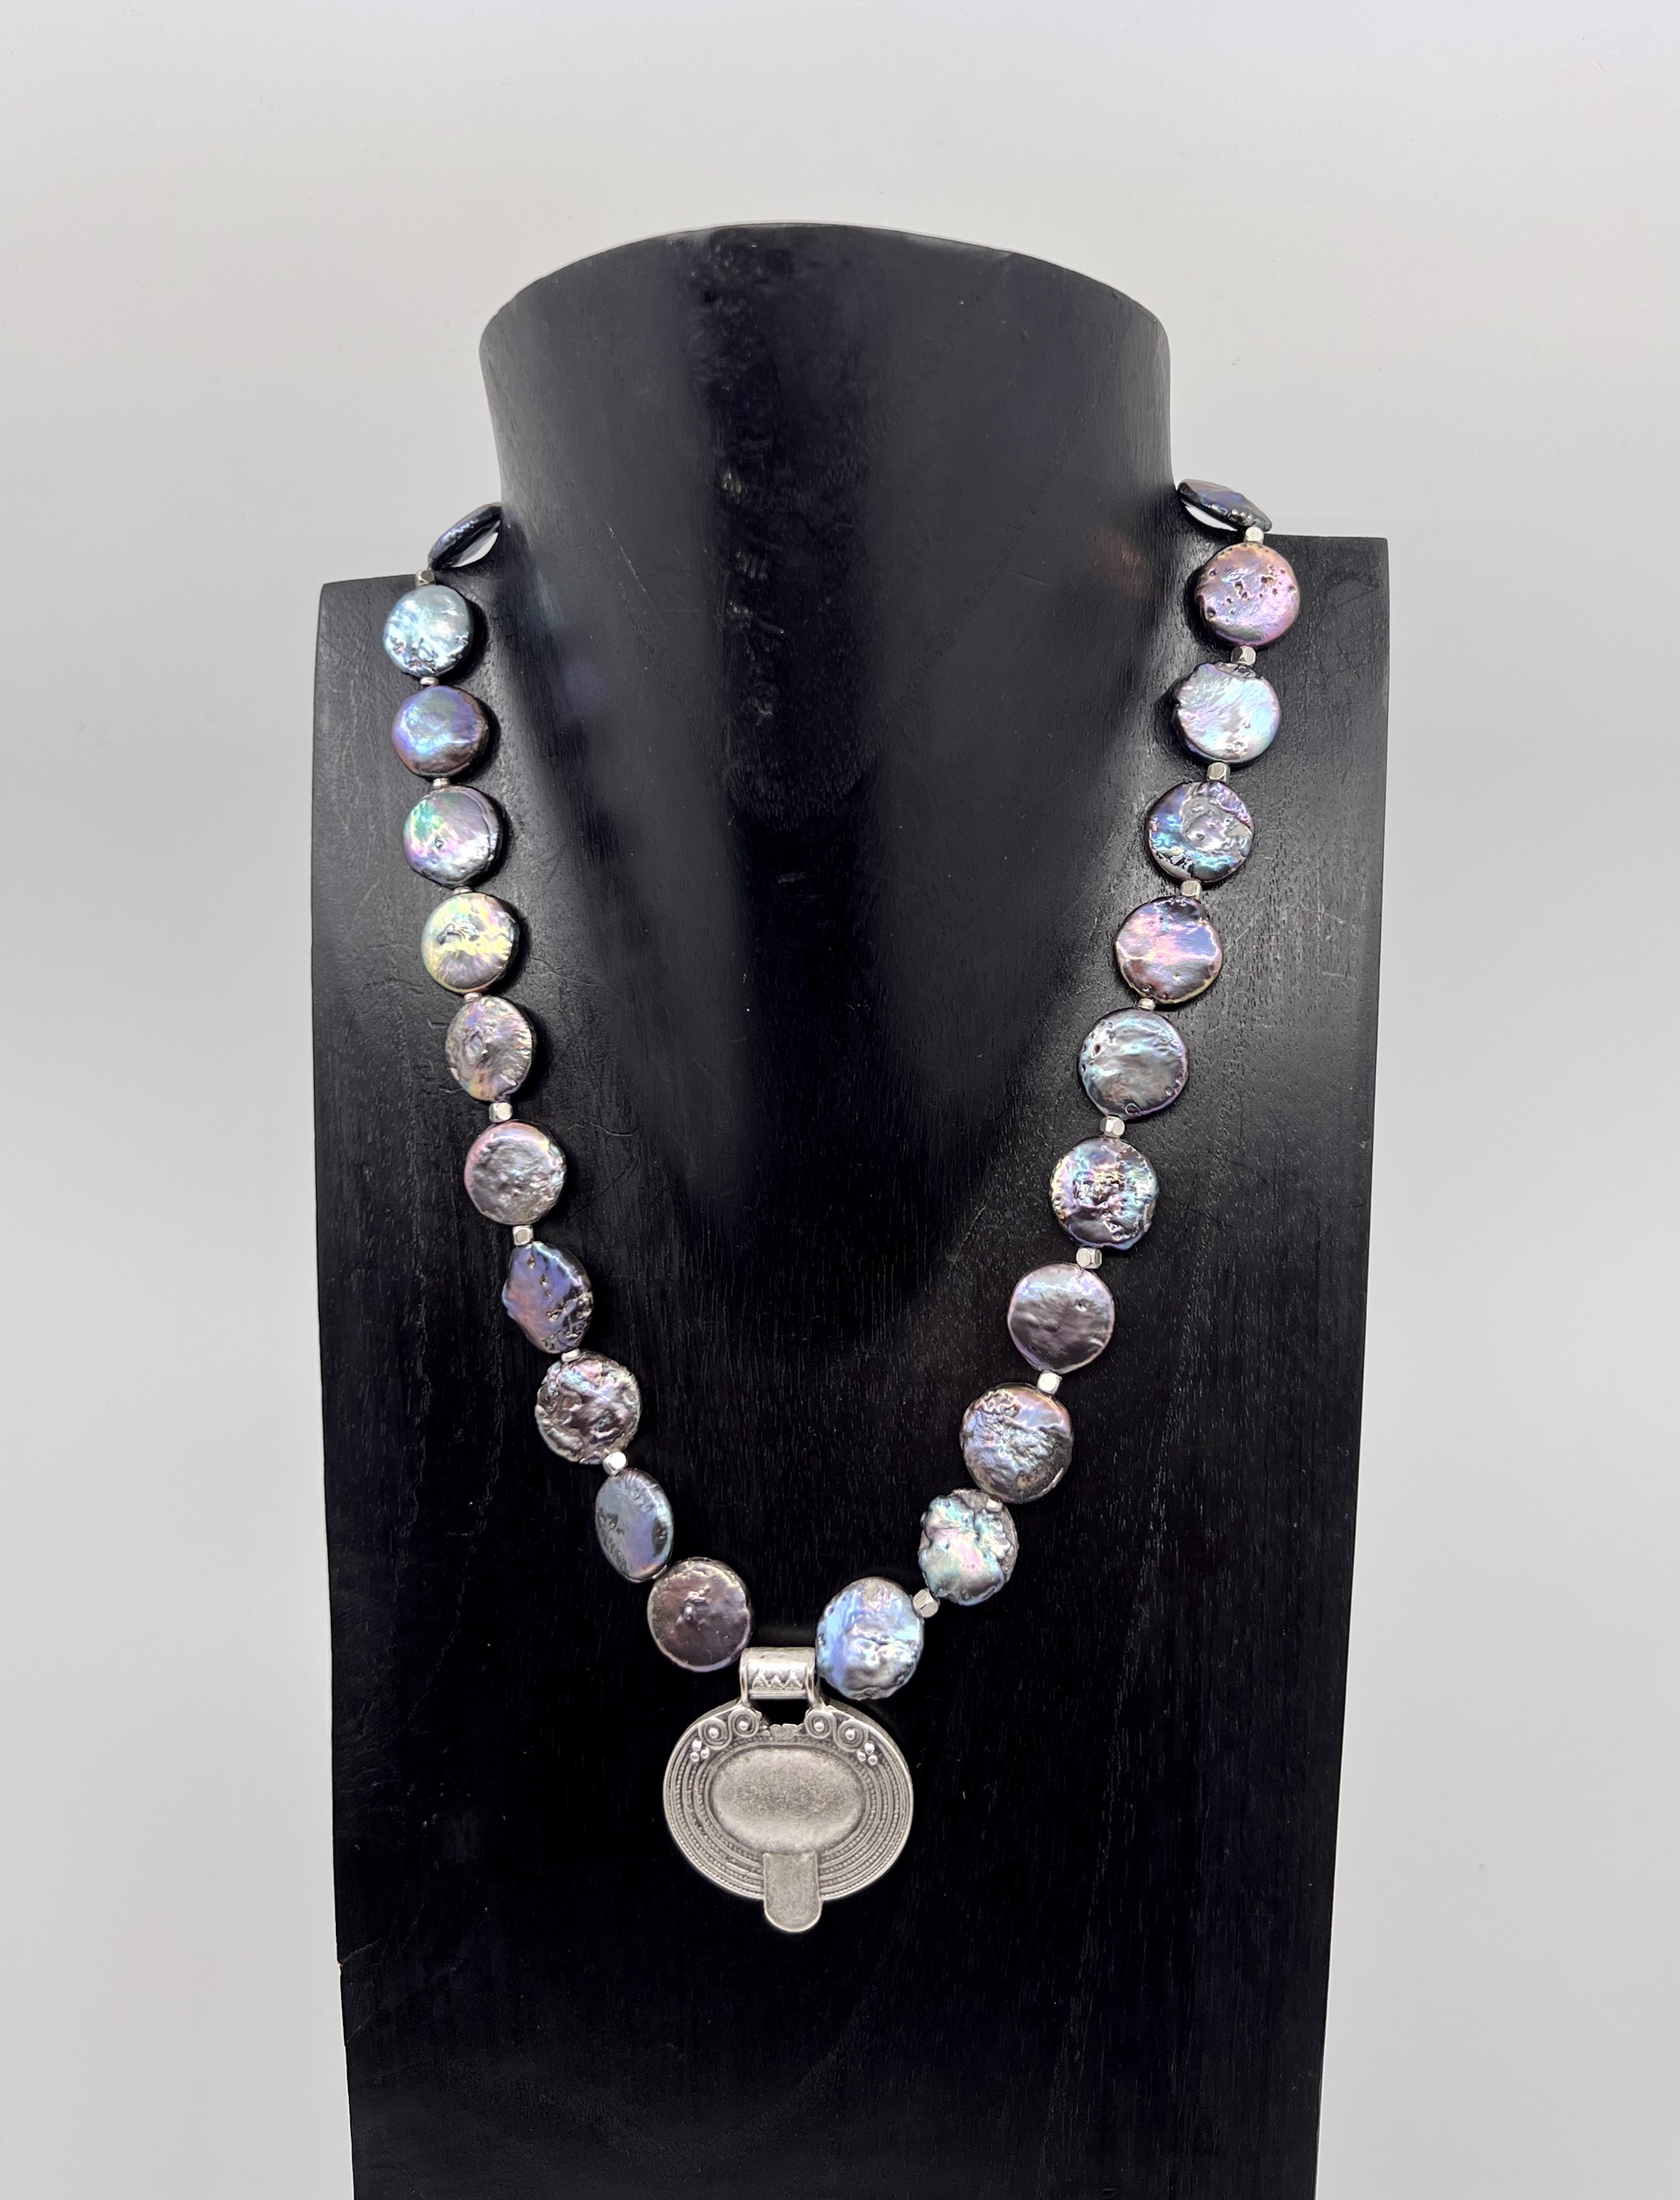 9138 Japanese Freshwater Pearls with Silver Pendant by Gina Caruso